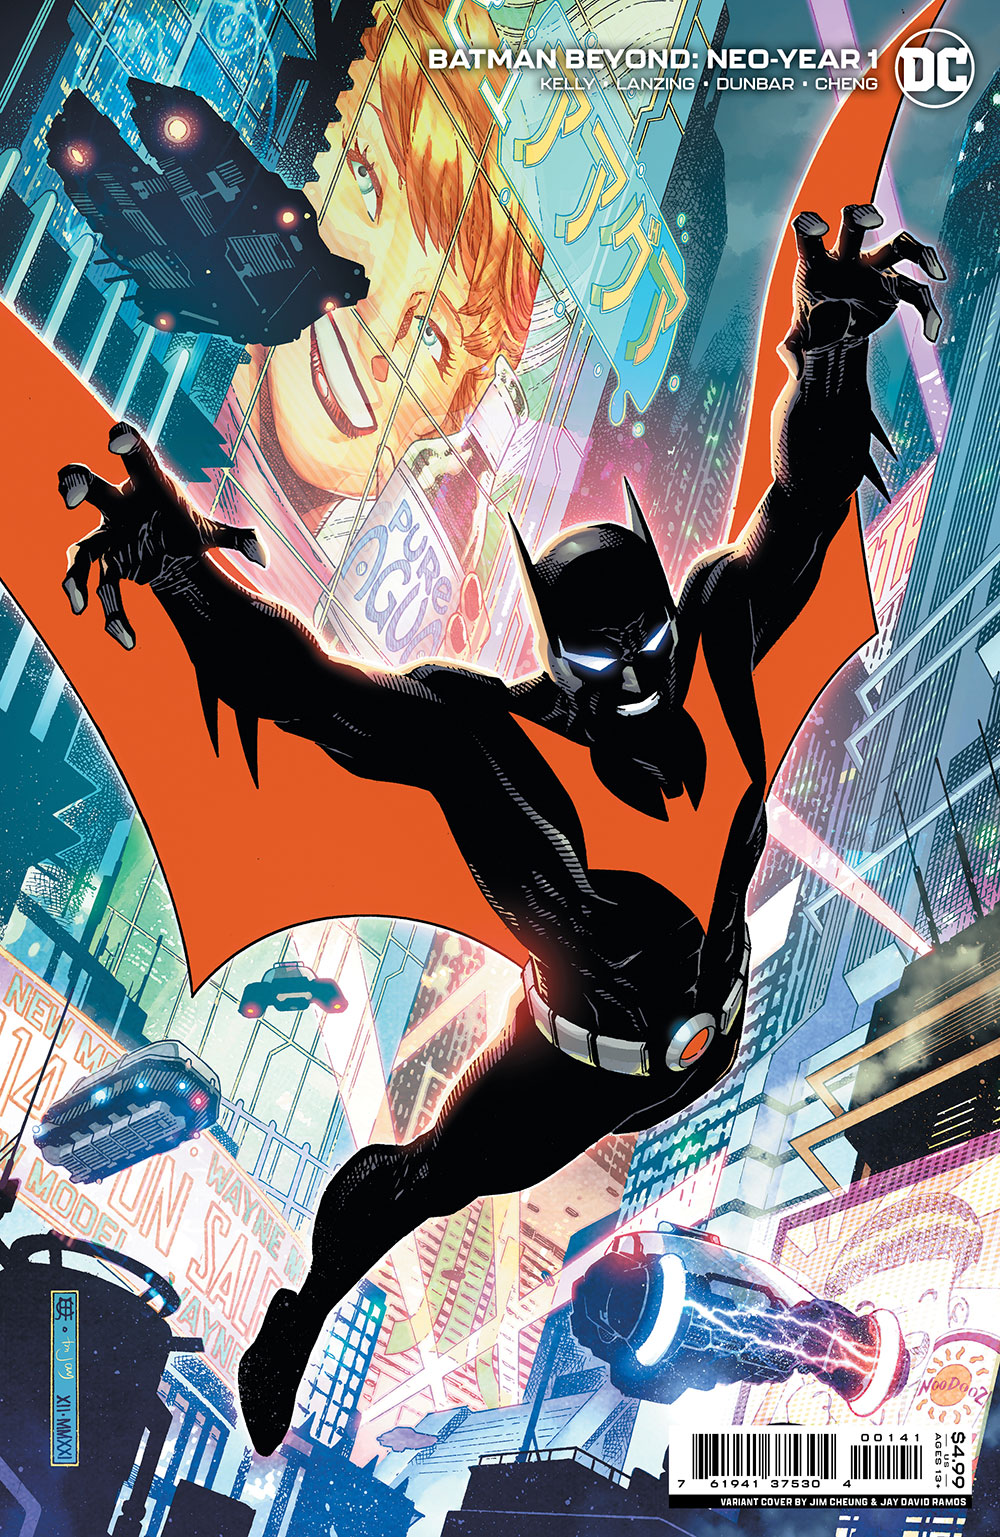 Batman Beyond Neo-Year #1 Cover D 1 for 100 Incentive Jim Cheung Card Stock Variant (Of 6)